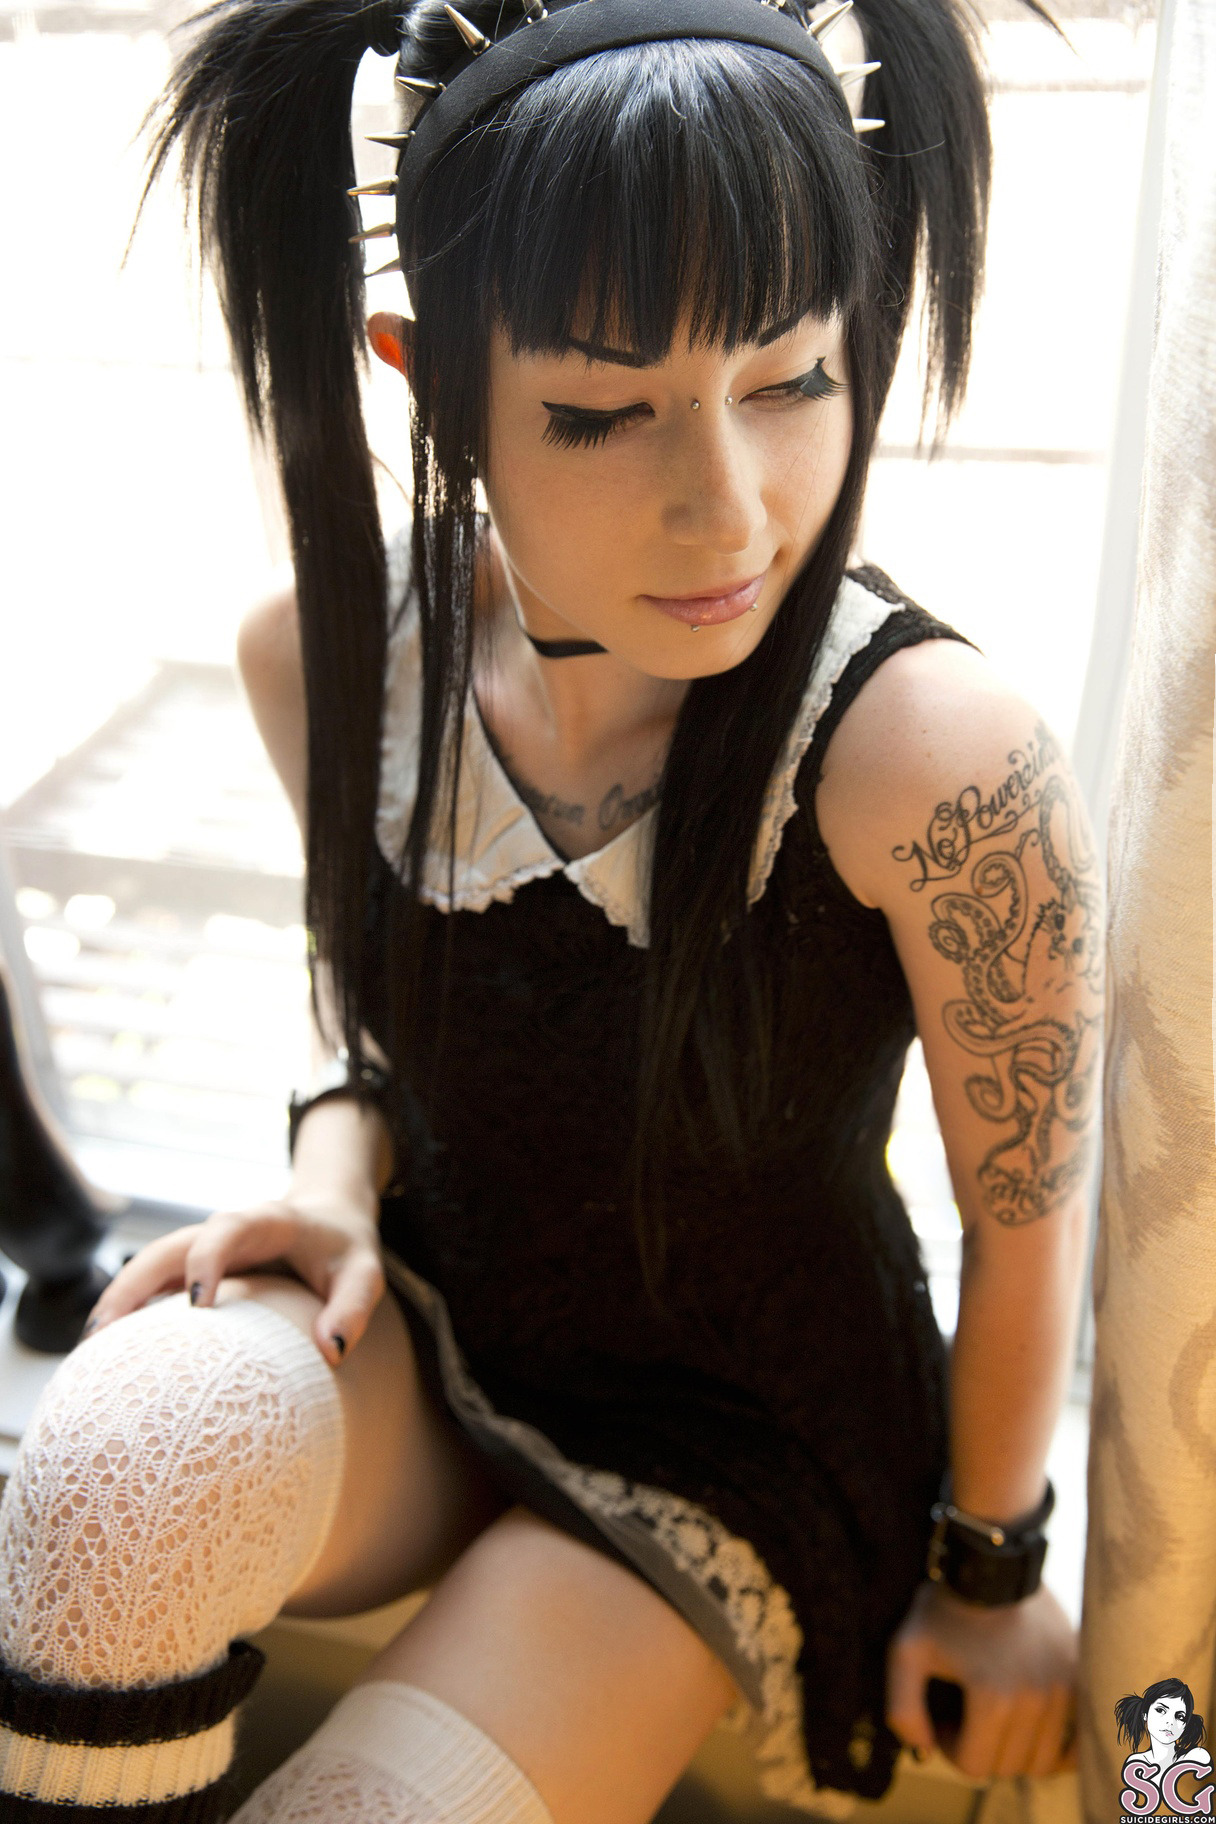 porphyriasuicide:  Little Black Dress by Azera just went up on Suicide Girls in Member